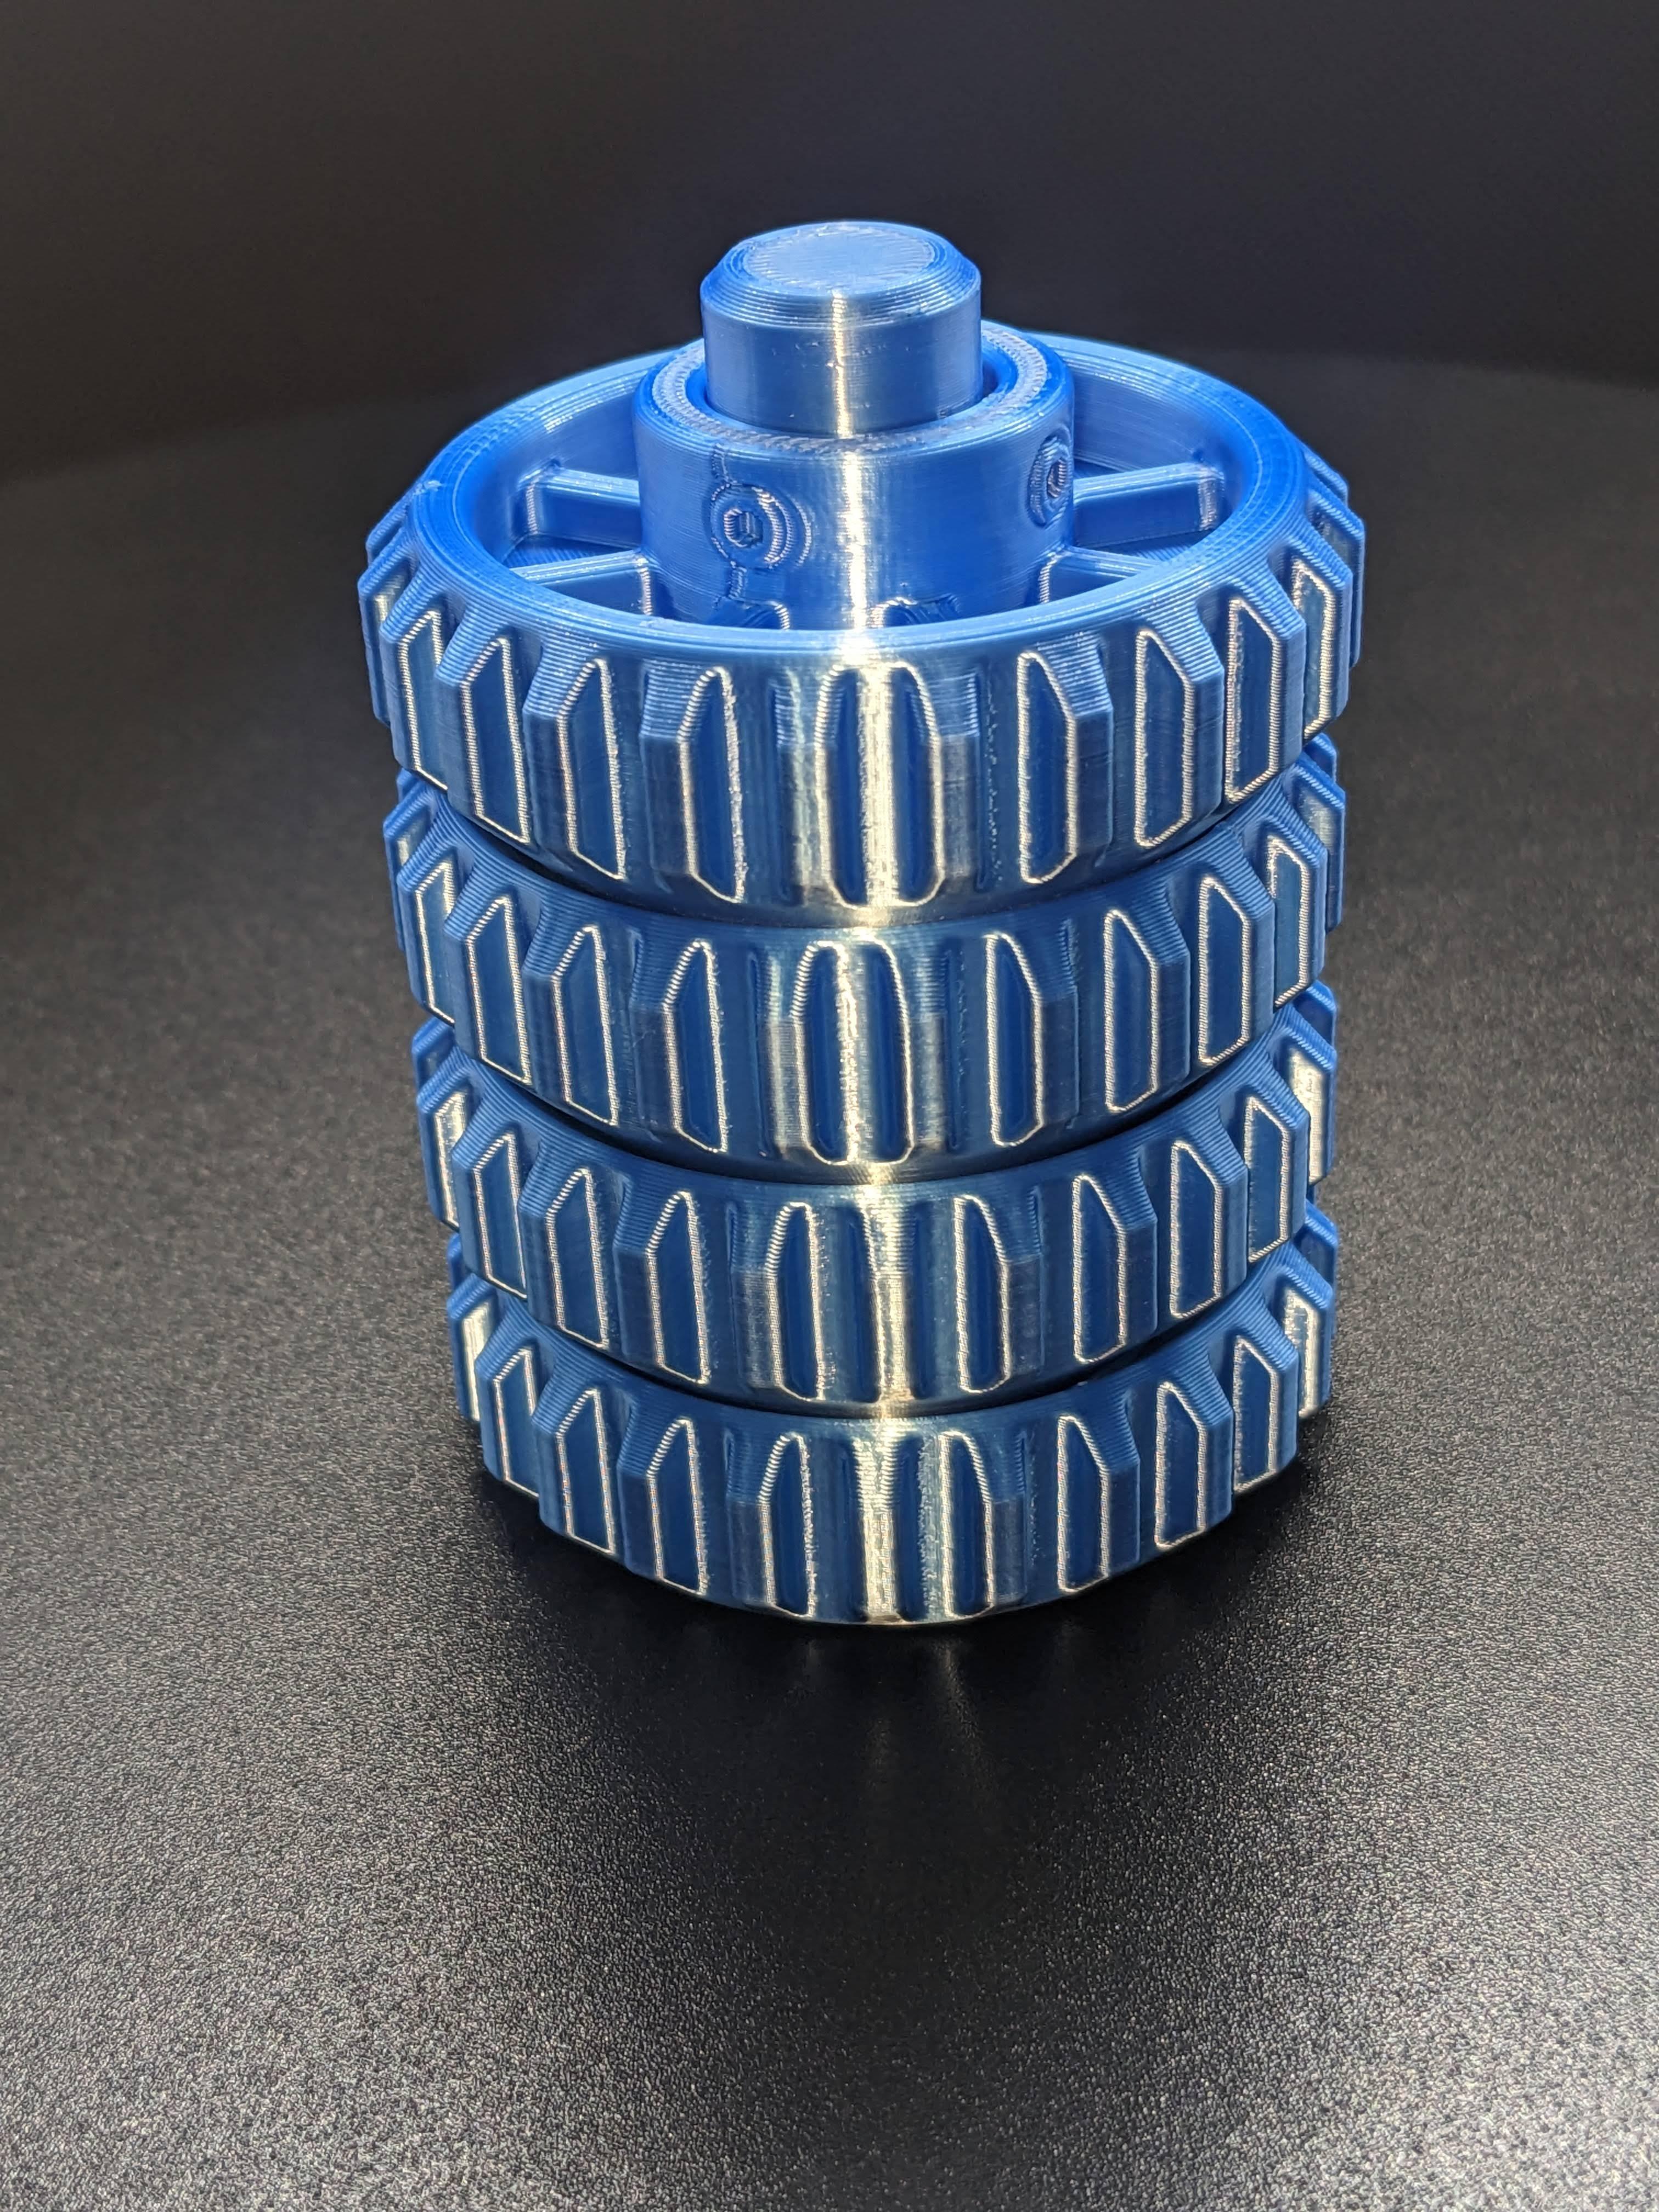 The Impossible Gear Fidget - Made on the Prusa MINI+ with 0.4 nozzle, 0.2 LH, 15% infill from Polymaker PolyLite PLA "Silk Blue". - 3d model